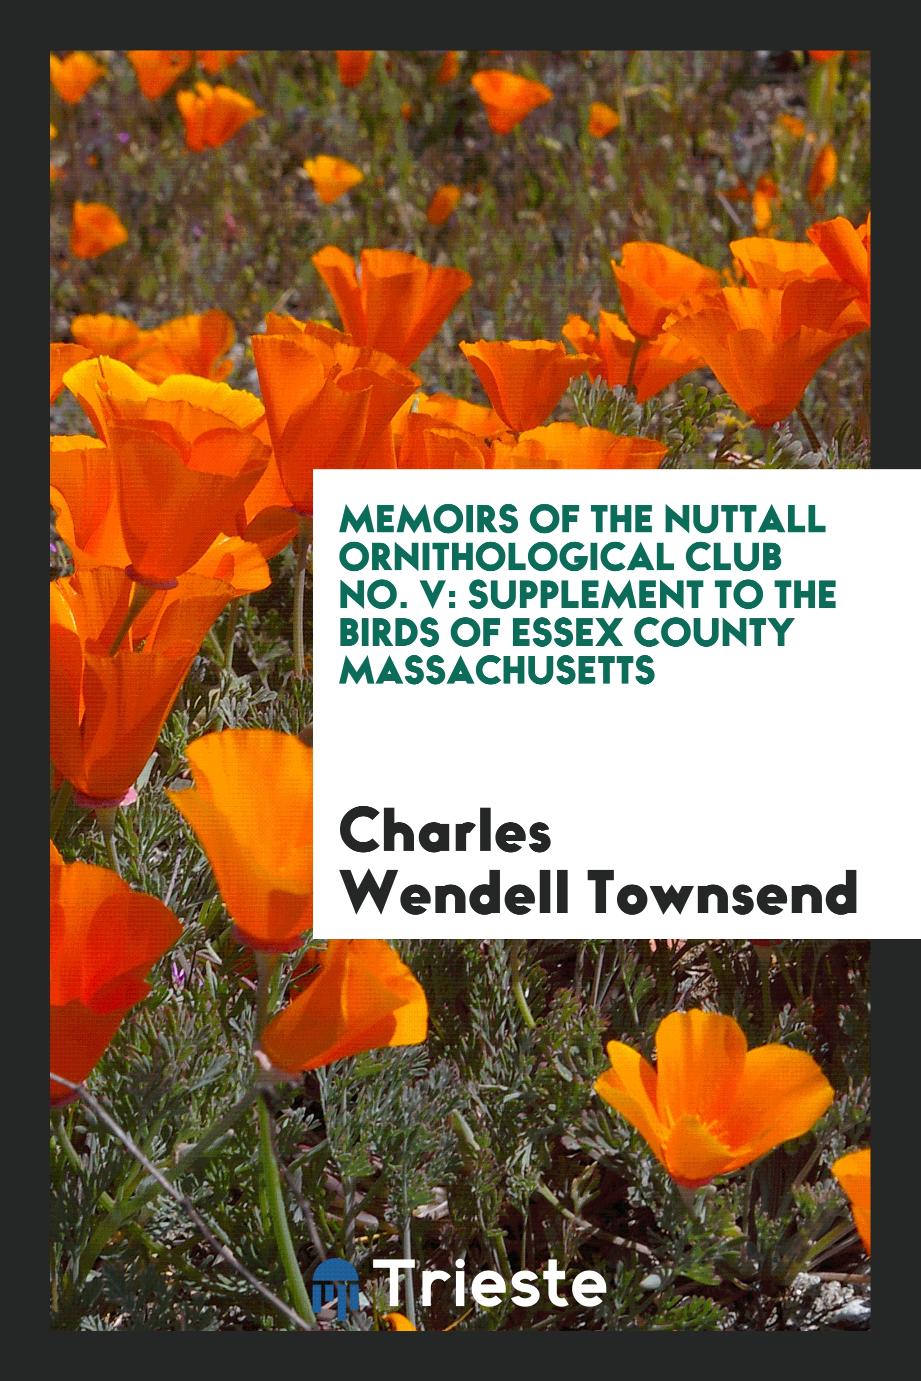 Memoirs of the Nuttall Ornithological Club No. V: Supplement to the birds of essex county Massachusetts